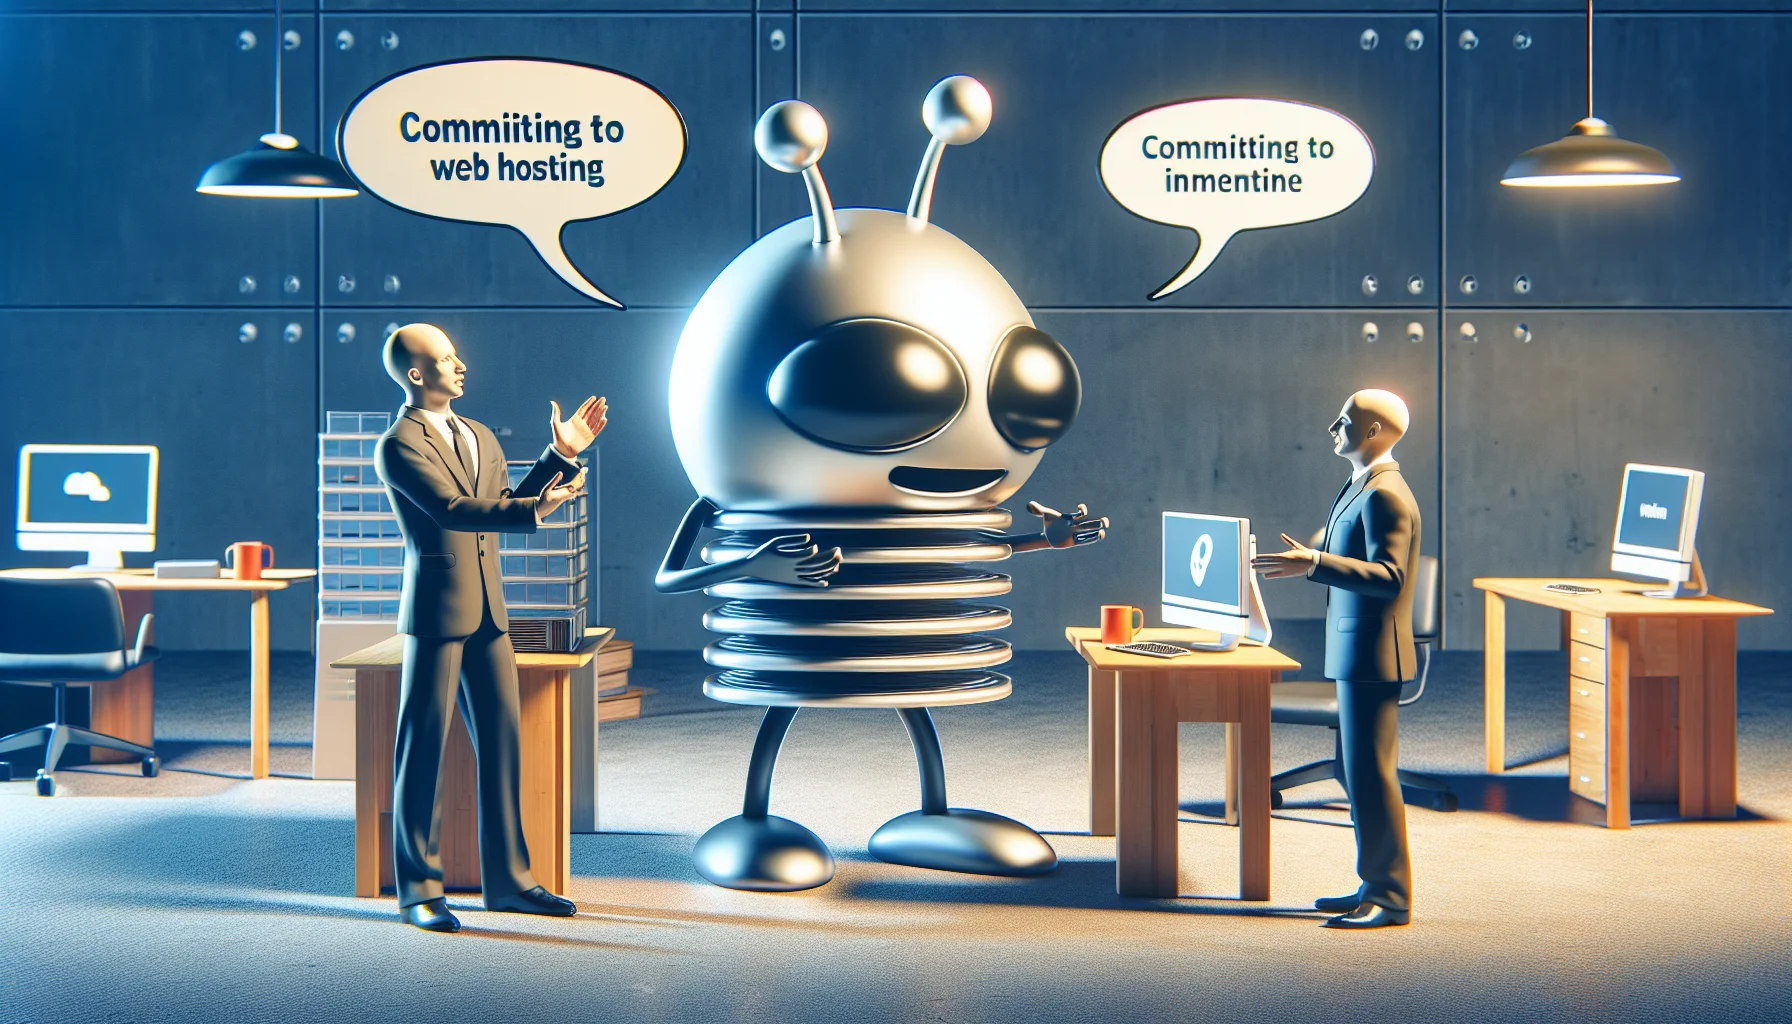 Visualize a humorous scenario where a metaphorical character representing a popular internet forum is debating the benefits of committing to a web hosting service. Show two figures, one is a personified symbol of an online forum, an anthropomorphized alien logo with antenna, conversing with another figure as an abstract embodiment of a web hosting service, depicted as a modern skyscraper. The environment suggests they are in an office space, with computers, desks and coffee mugs. In this discussion, they are using detailed, technical jargon, and the hosting service is convincing the online forum using persuasive manner, creating a funny interaction.